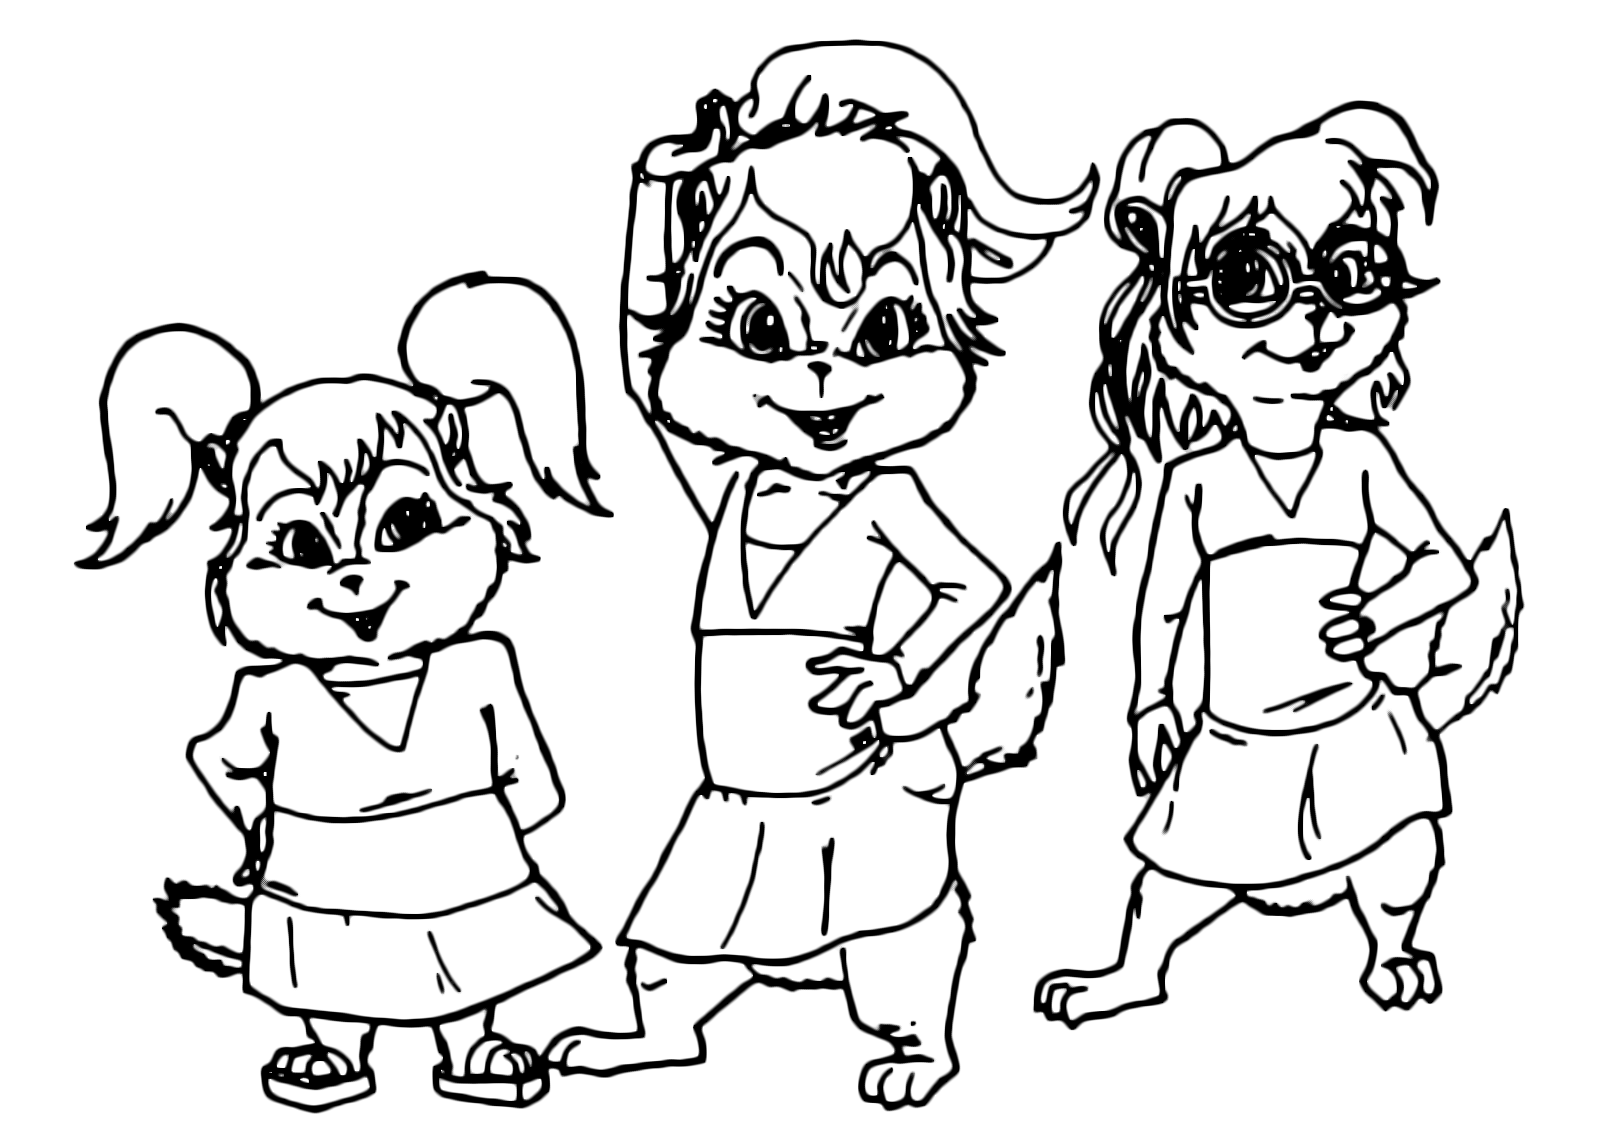 Alvin and the Chipmunks - The Chippetts Brittany Miller Jeanette Miller and Eleanor Miller